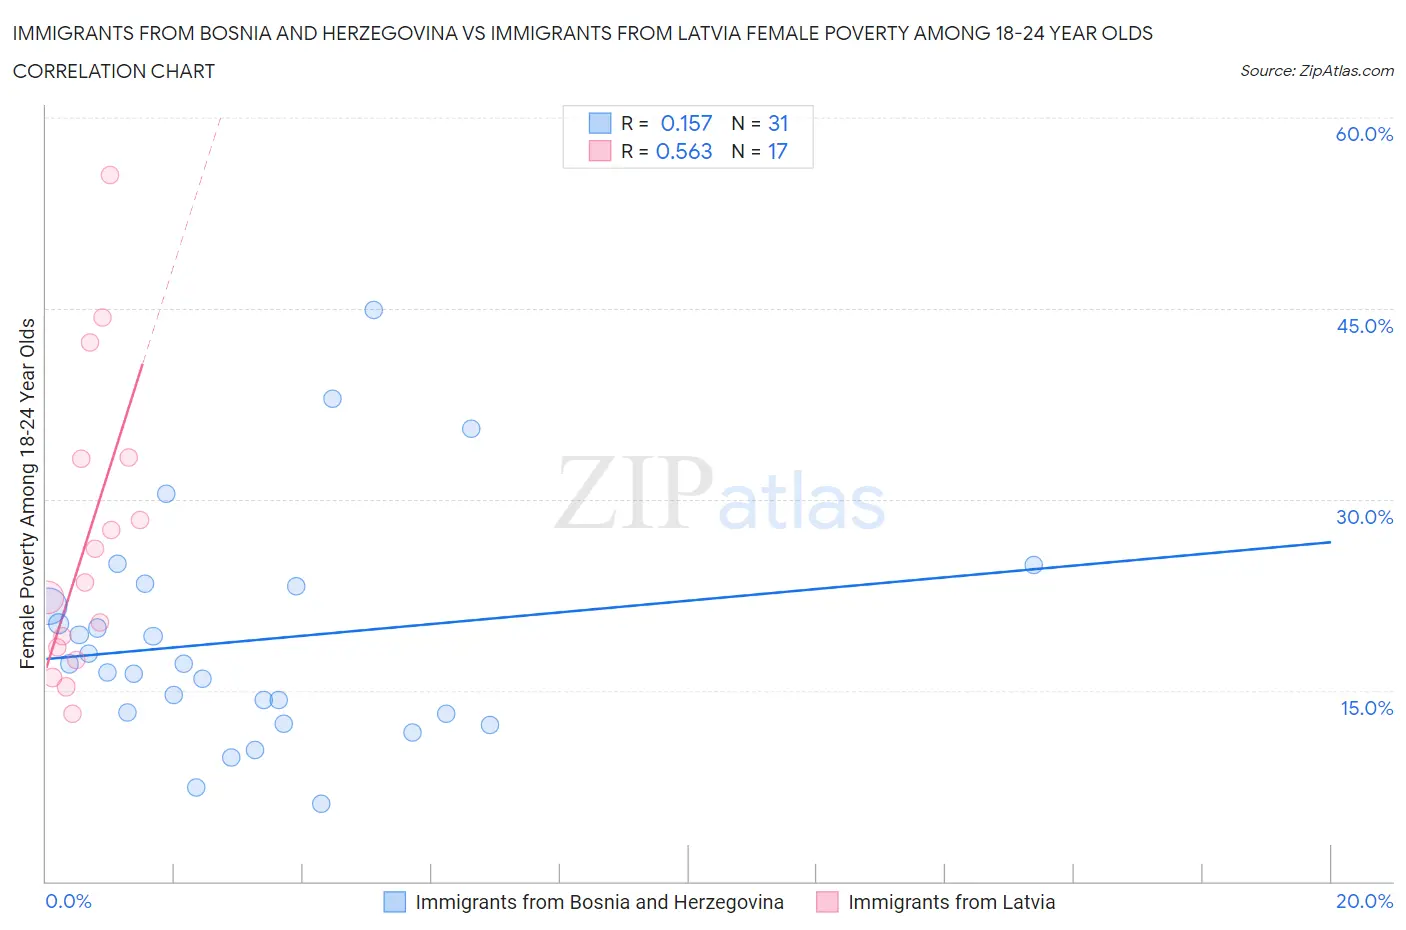 Immigrants from Bosnia and Herzegovina vs Immigrants from Latvia Female Poverty Among 18-24 Year Olds